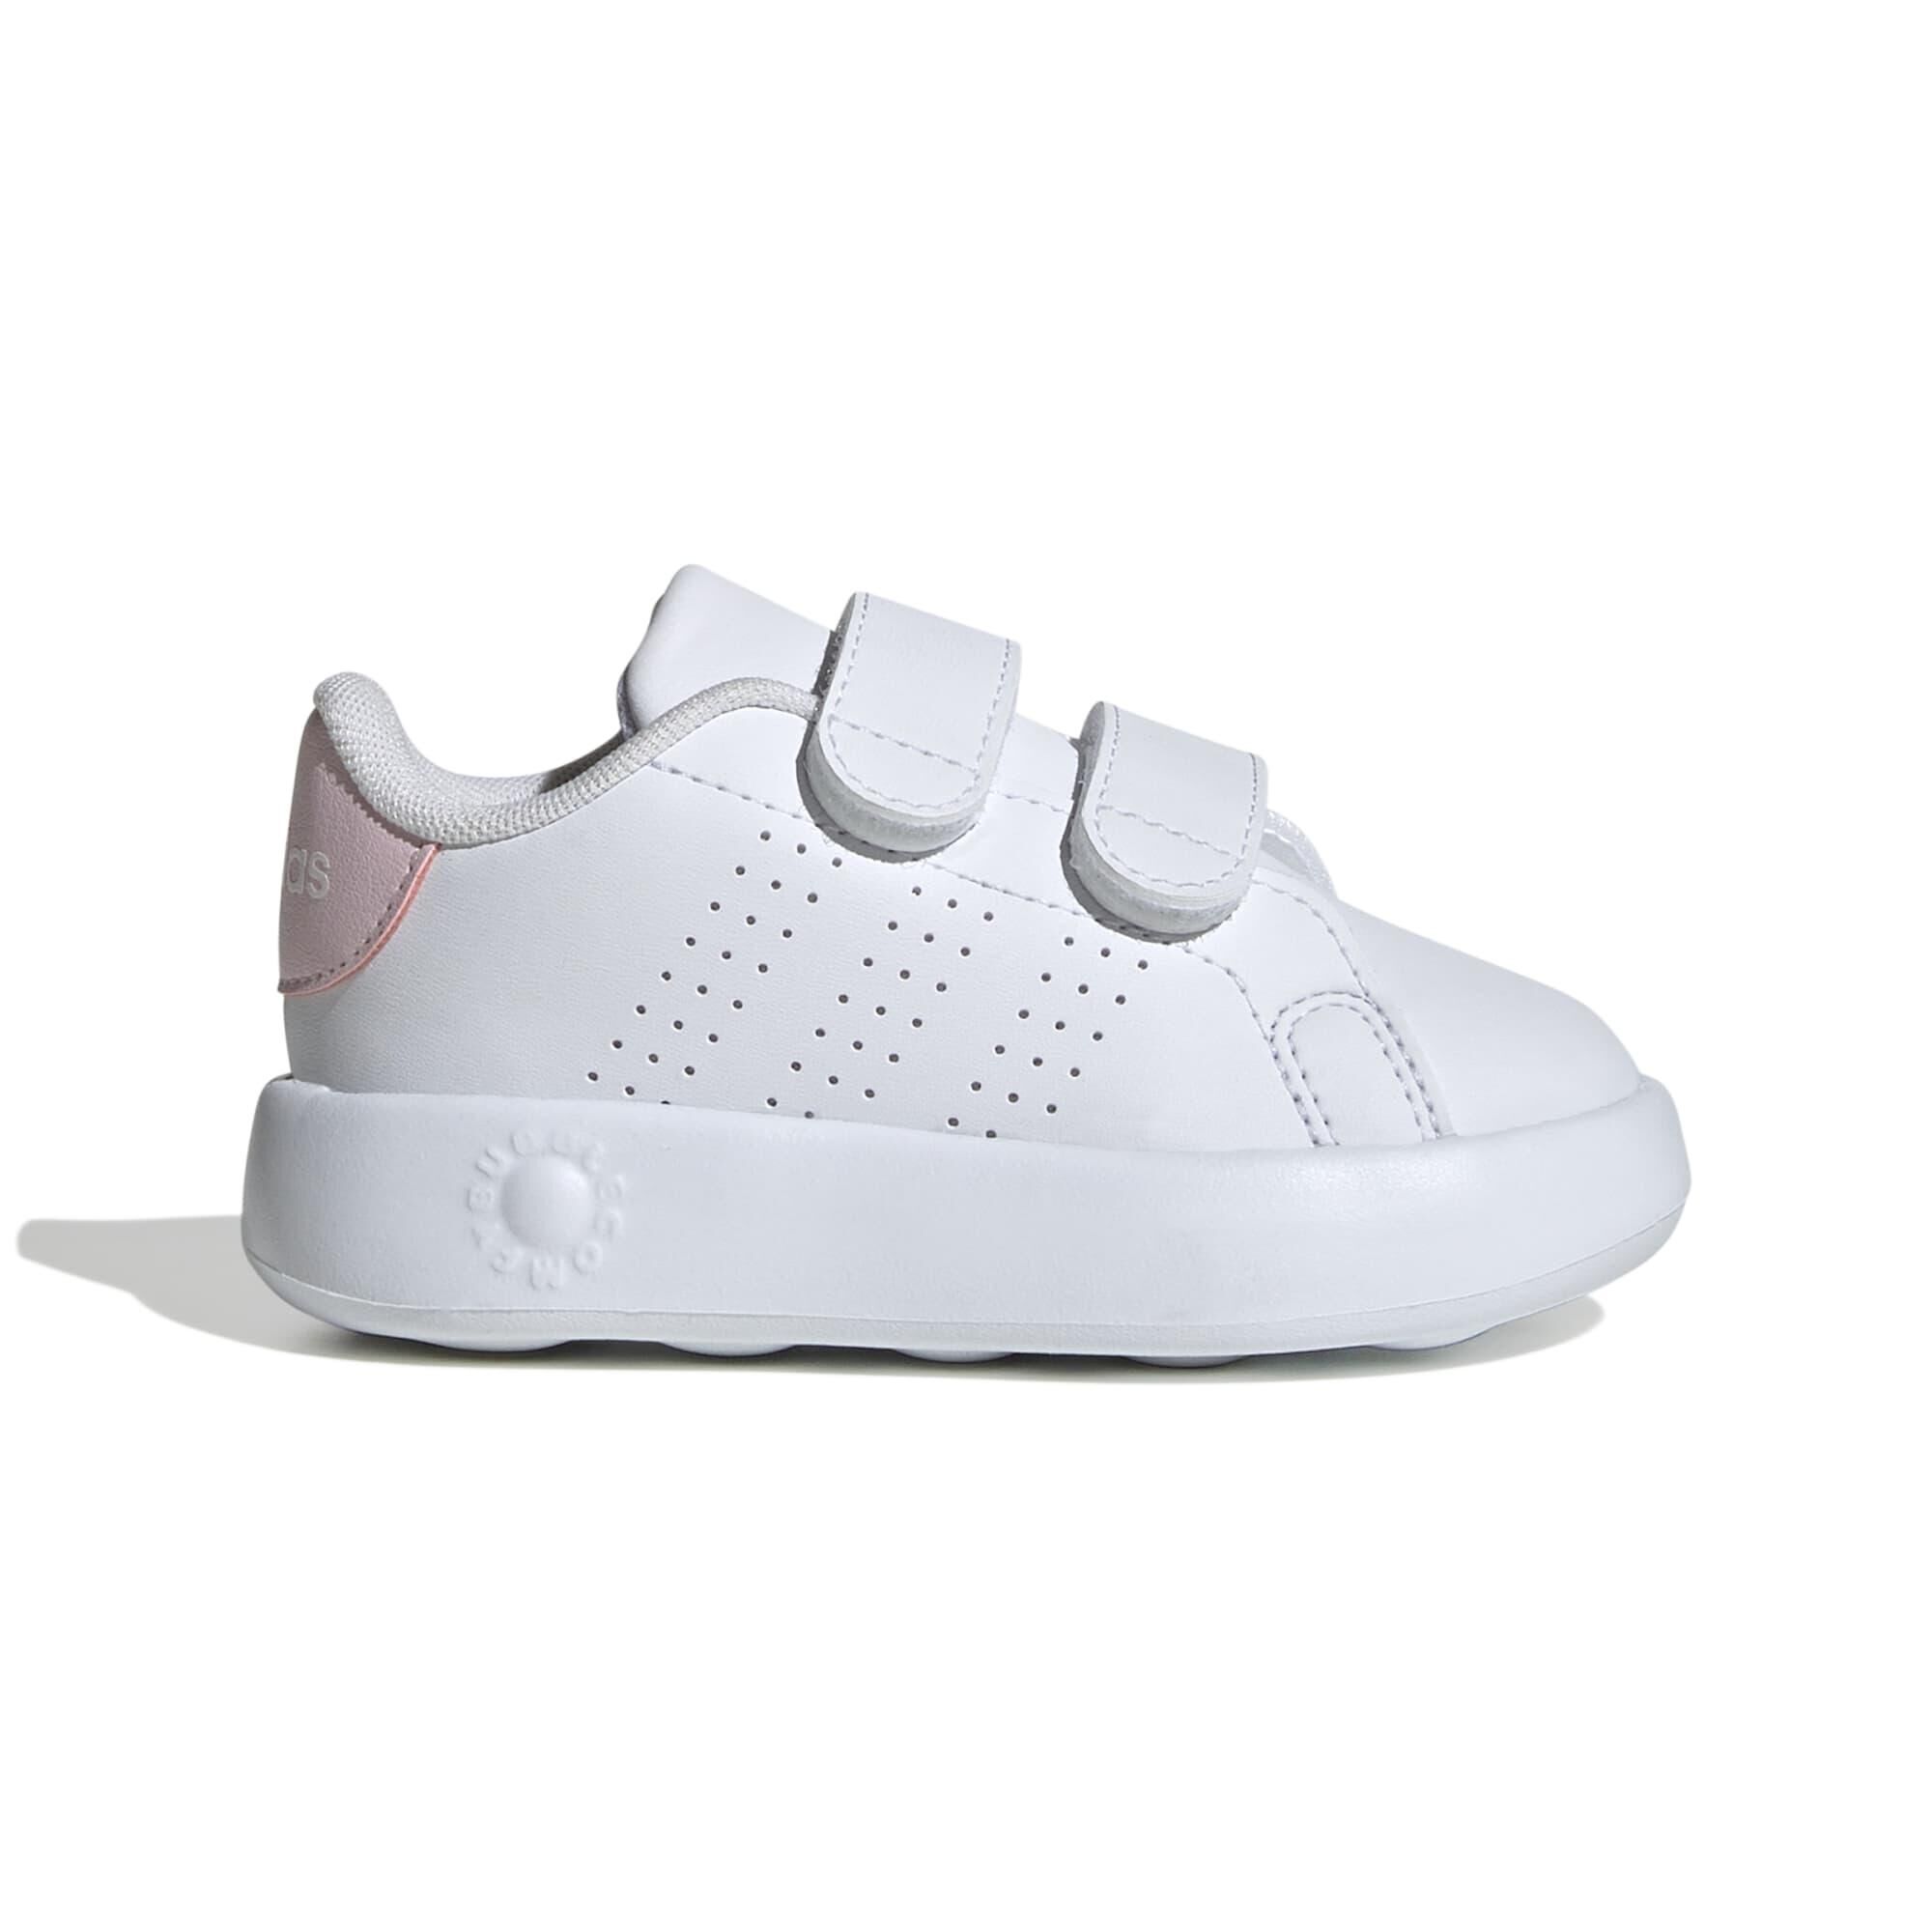 ADIDAS Baby Shoes Advantage (3.5C to 9C) - White/Pink